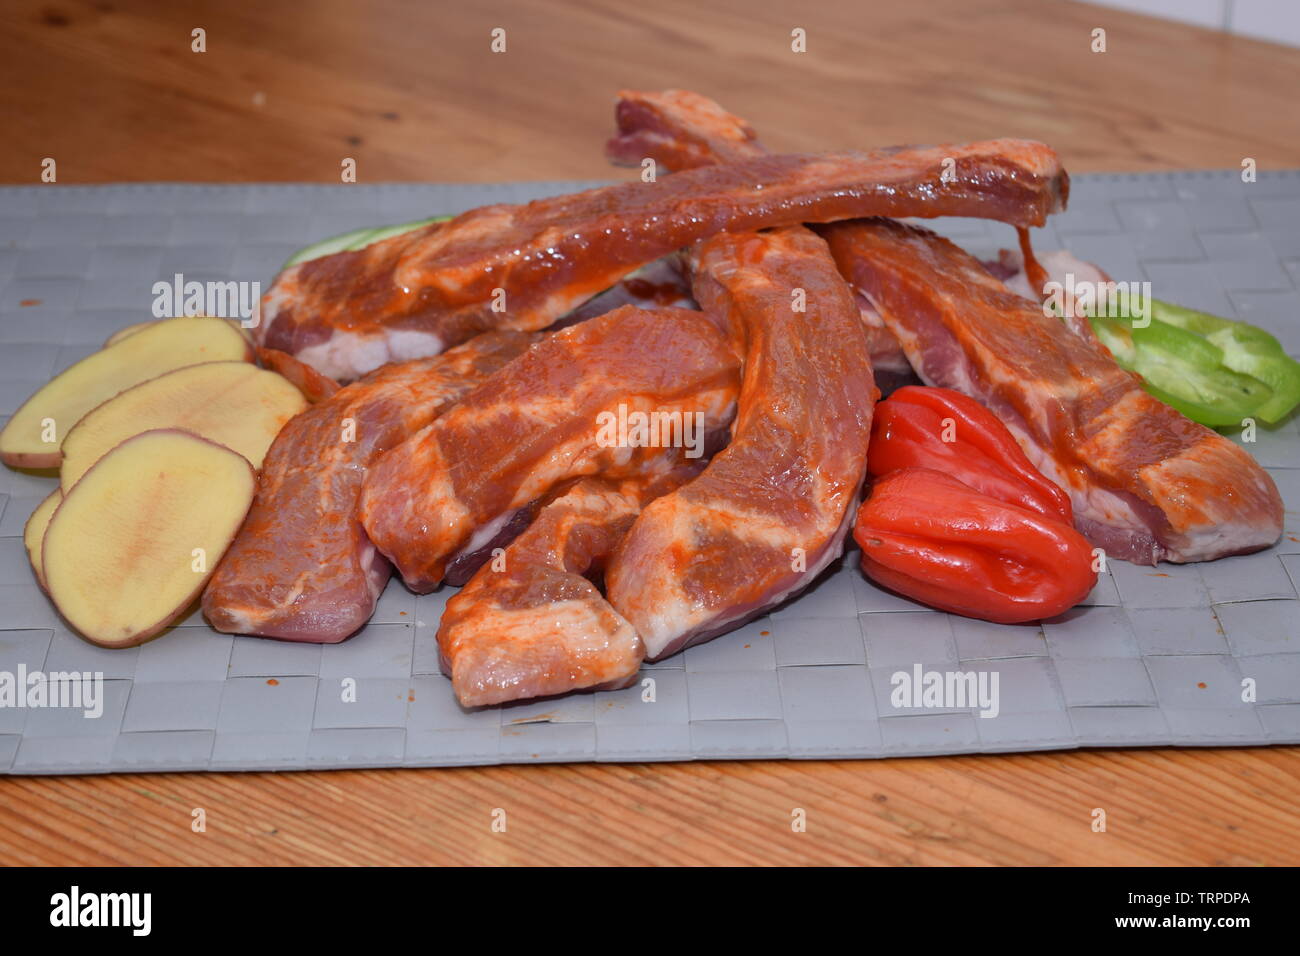 Marinated uncooked pork ribs laid on a clean grey surface with organic sliced vegetables Stock Photo